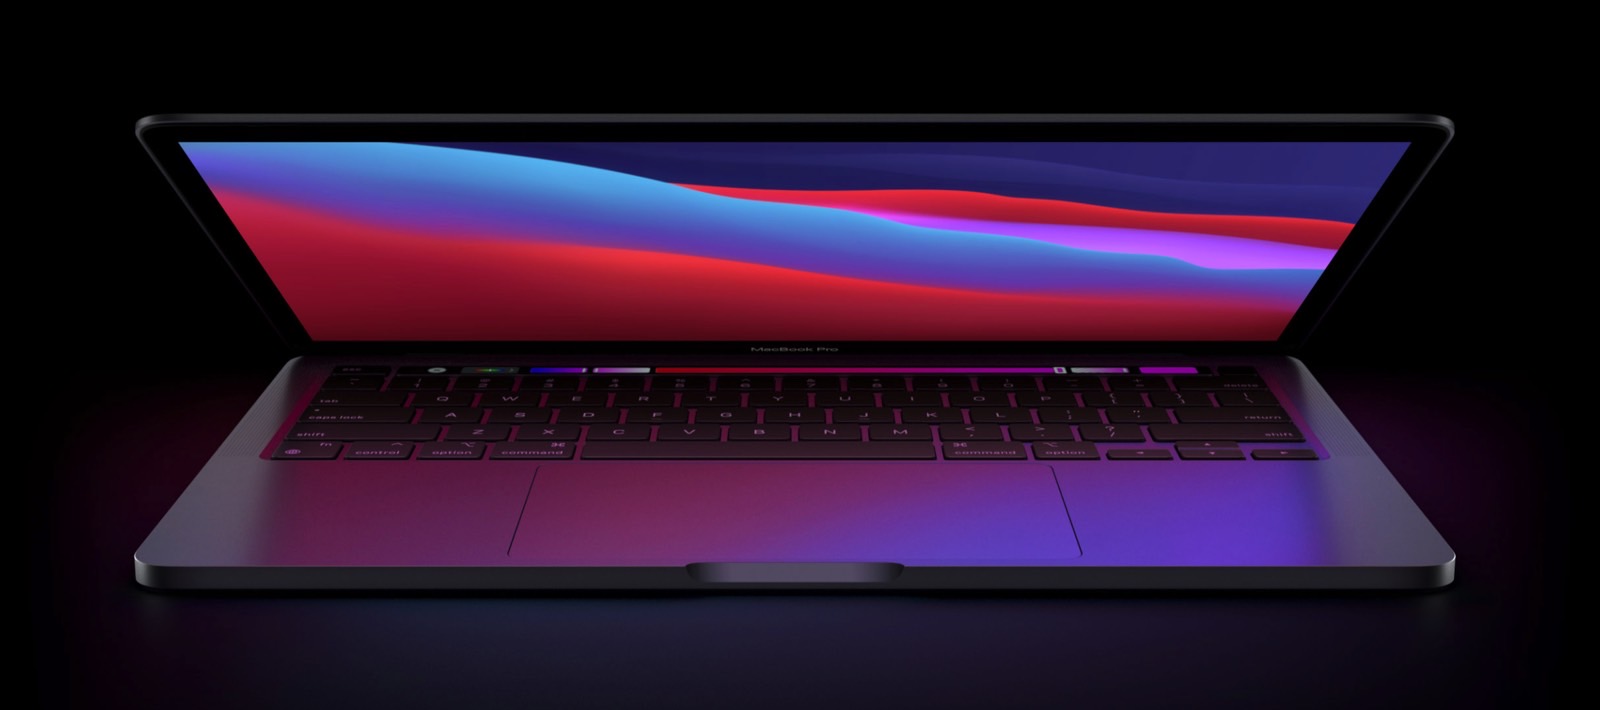 Insider says 2021 MacBook Pro is getting a redesign you’re going to